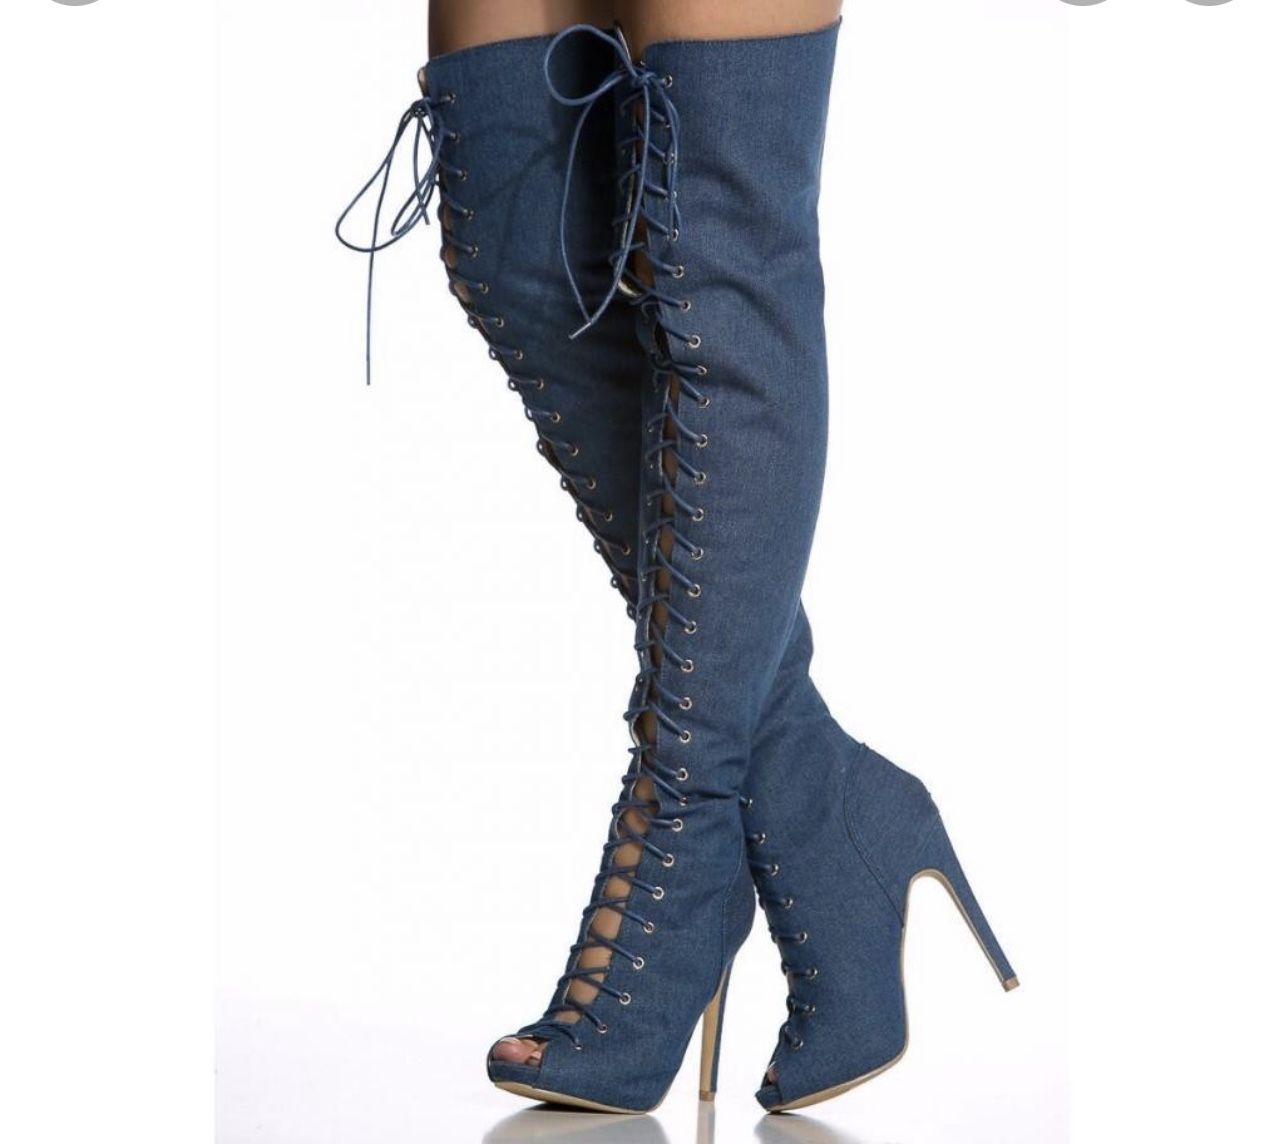 Jean Thigh High Lace Up Boots Size 7 1/2